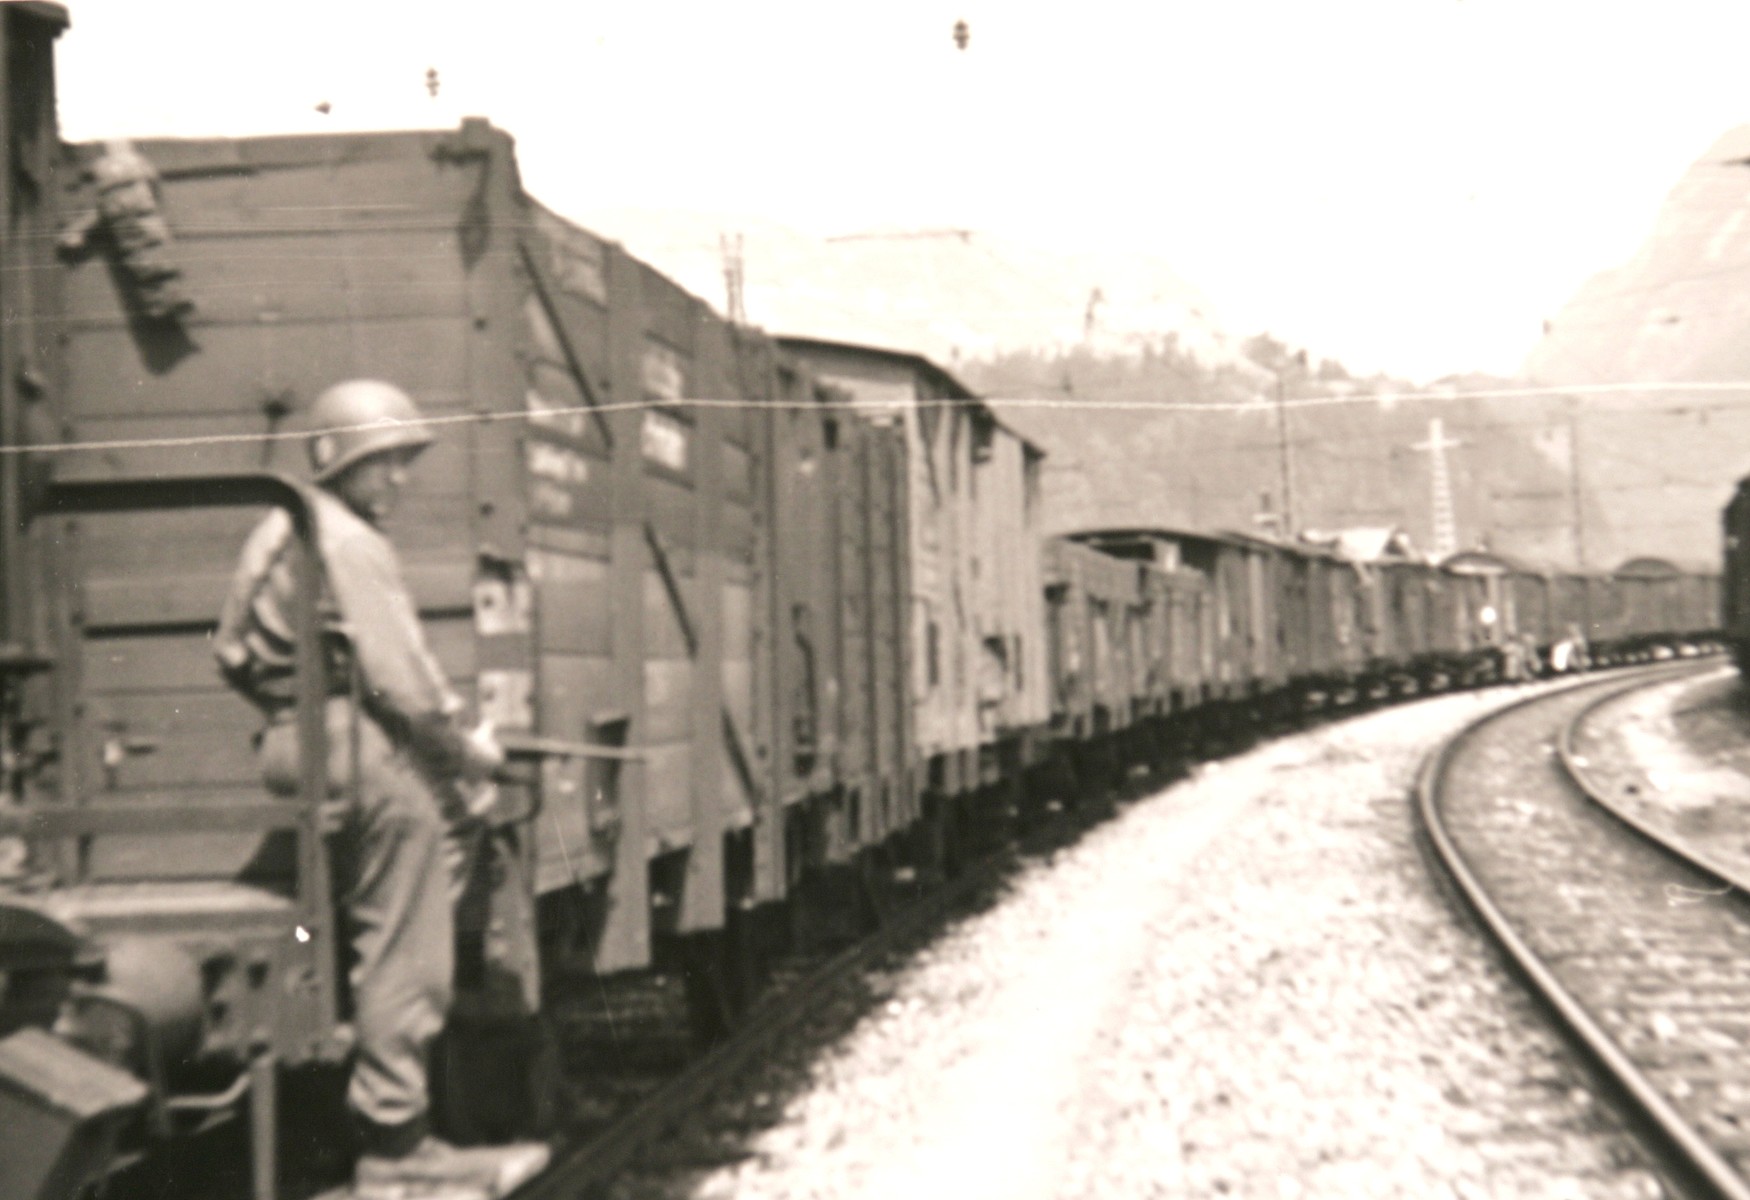 An American soldier guards the Hungarian Gold Train in Werfen, Austria, soon after the American occupation authorities took custody of the train.

The original caption reads: "The Hungarian train of loot; view of freight cars."